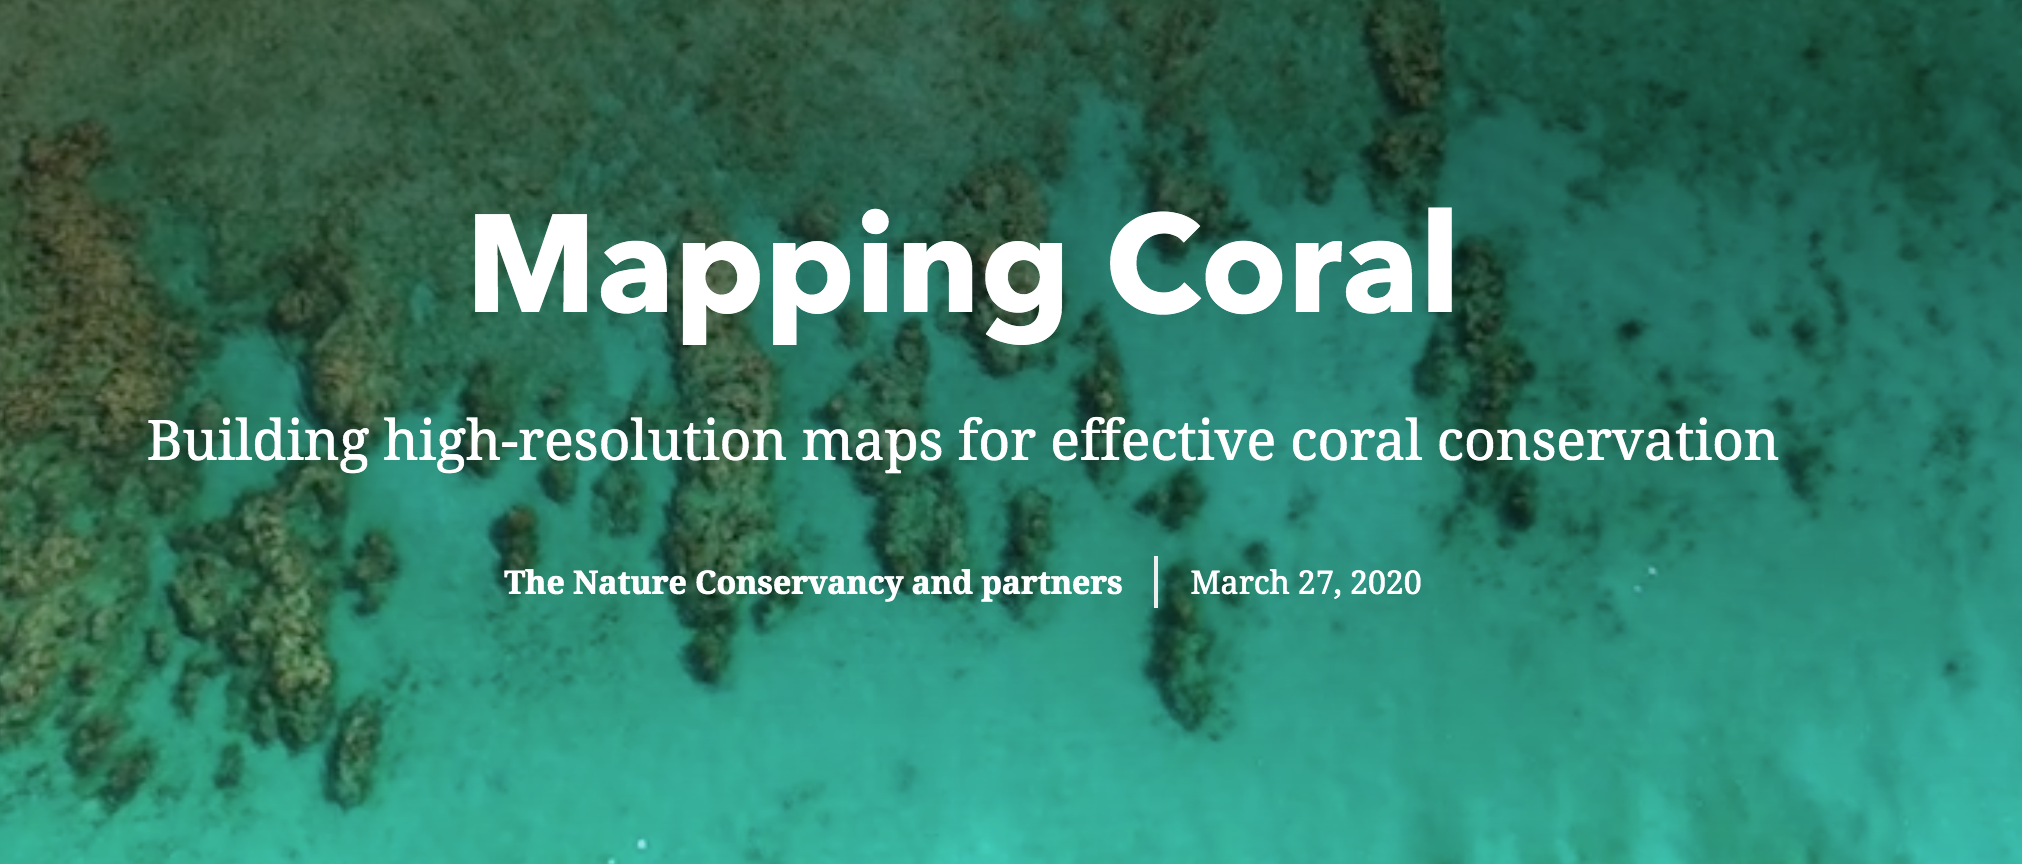 Mapping Coral